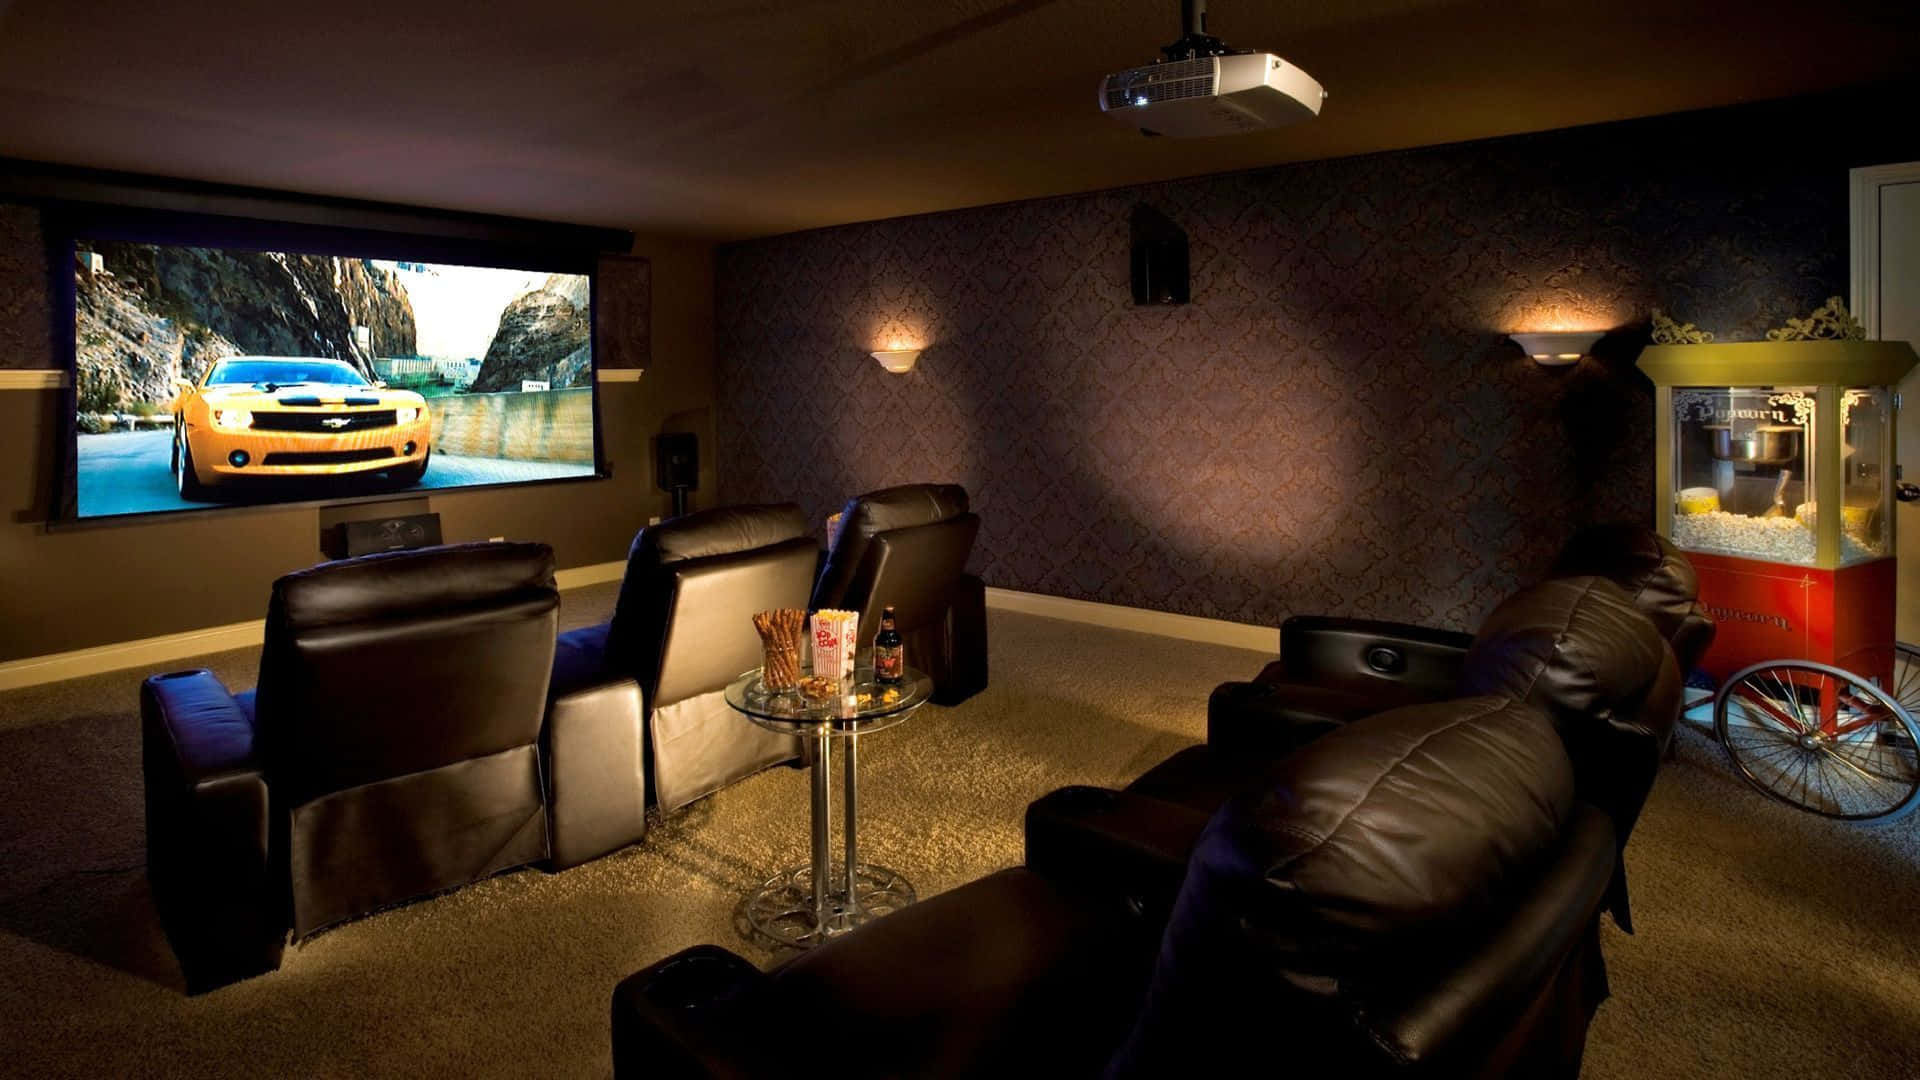 Enjoy Movies and TV Shows from the Comfort of your Home Cinema Setup Wallpaper